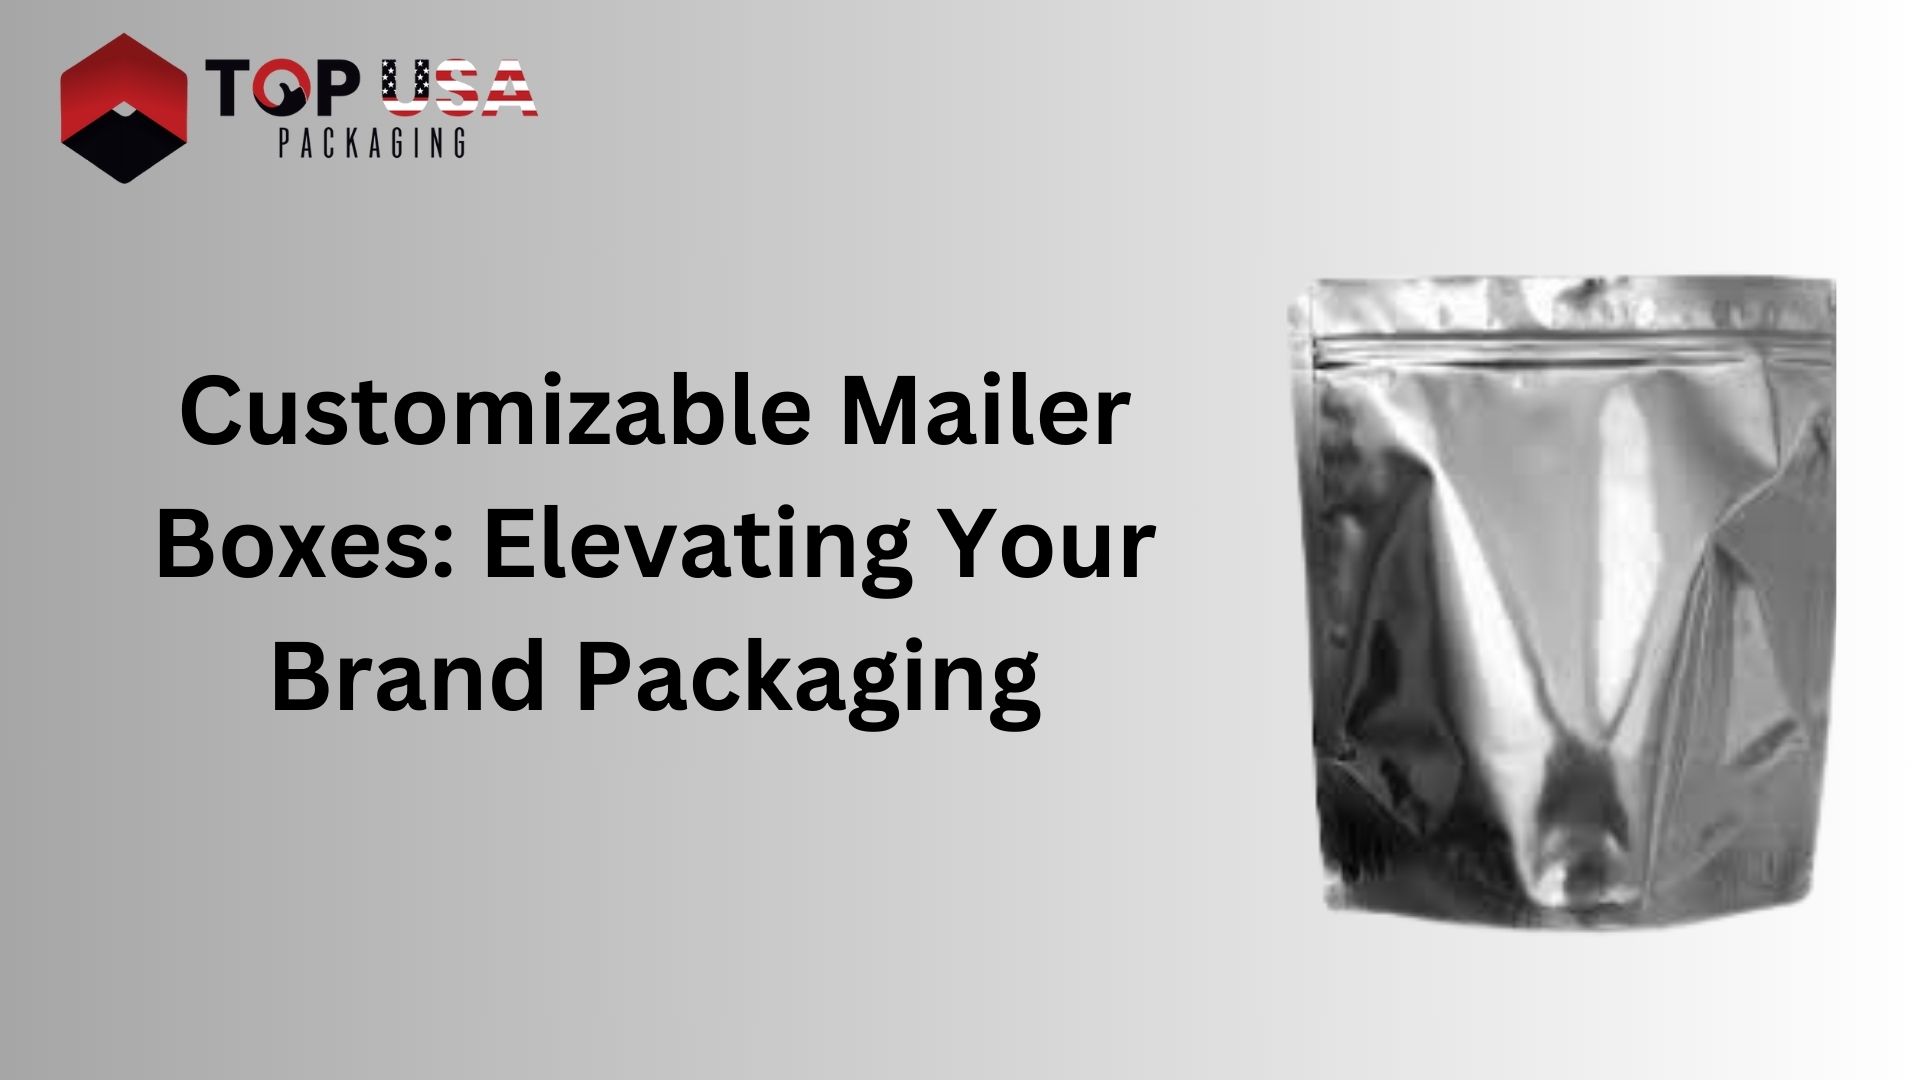 Customizable Mailer Boxes: Elevating Your Brand Packaging